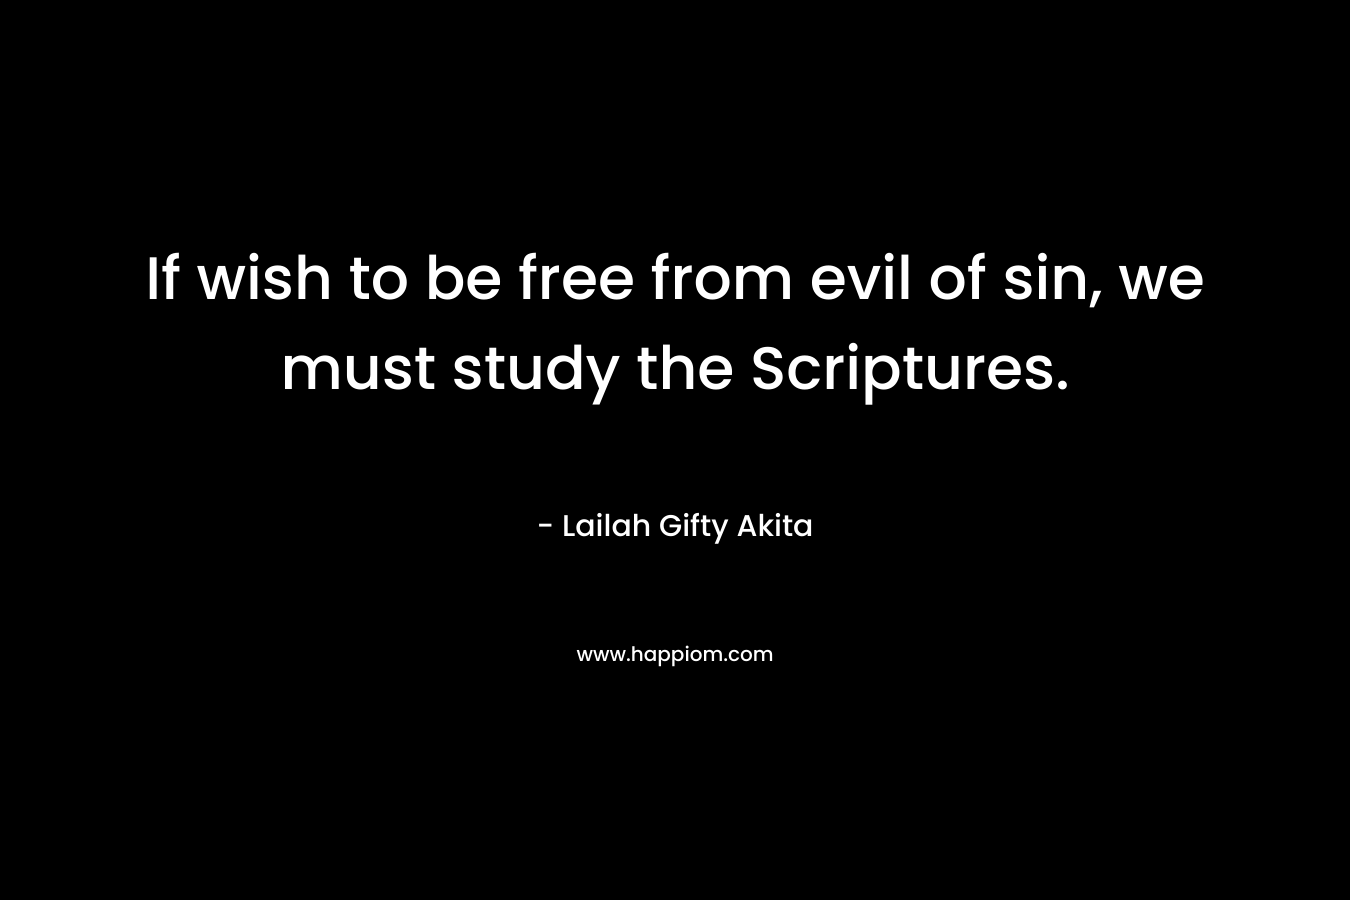 If wish to be free from evil of sin, we must study the Scriptures.